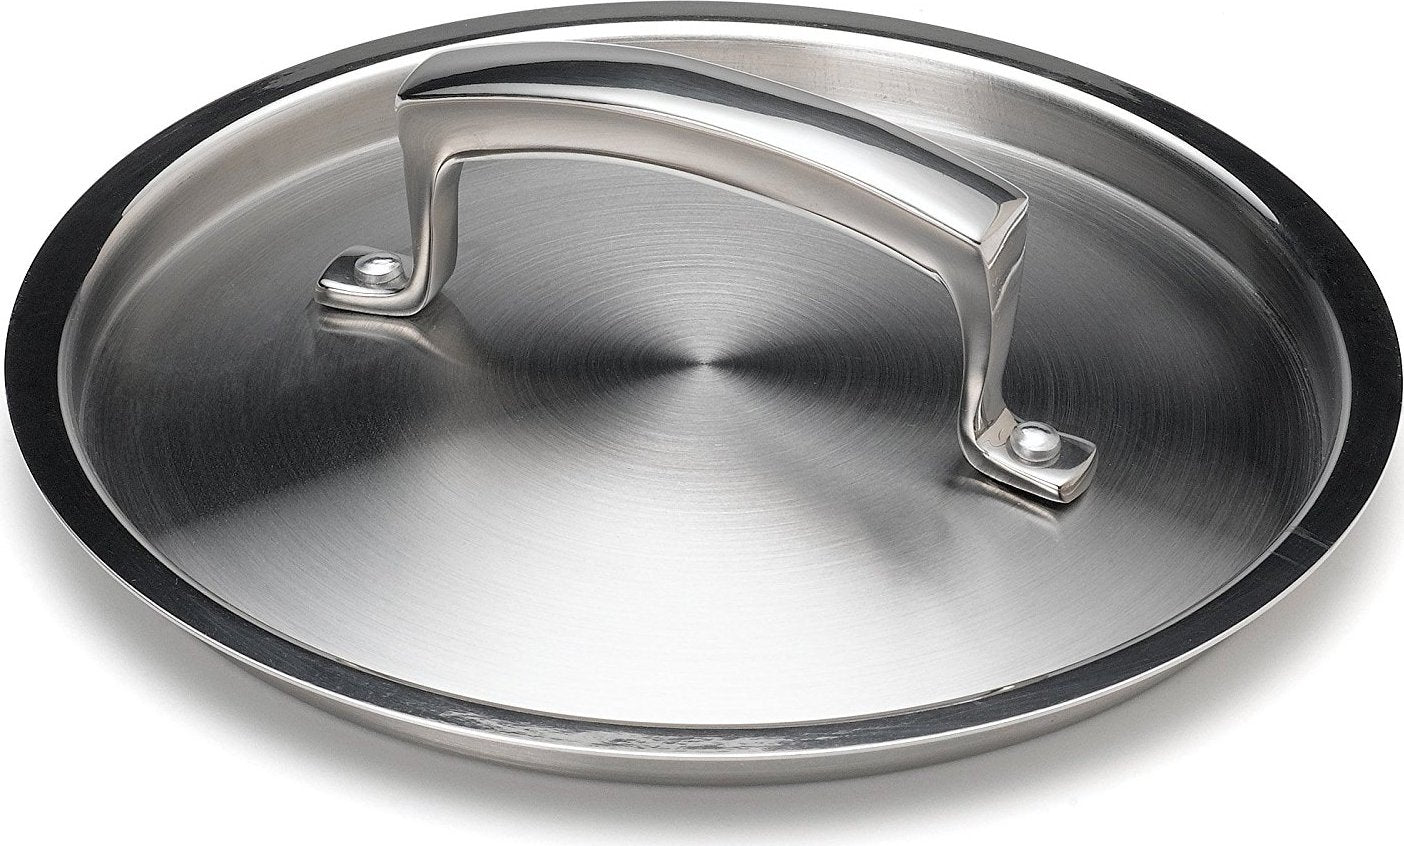 Thermalloy - 7.8" Stainless Steel Sauce Pan Lid - 5724120